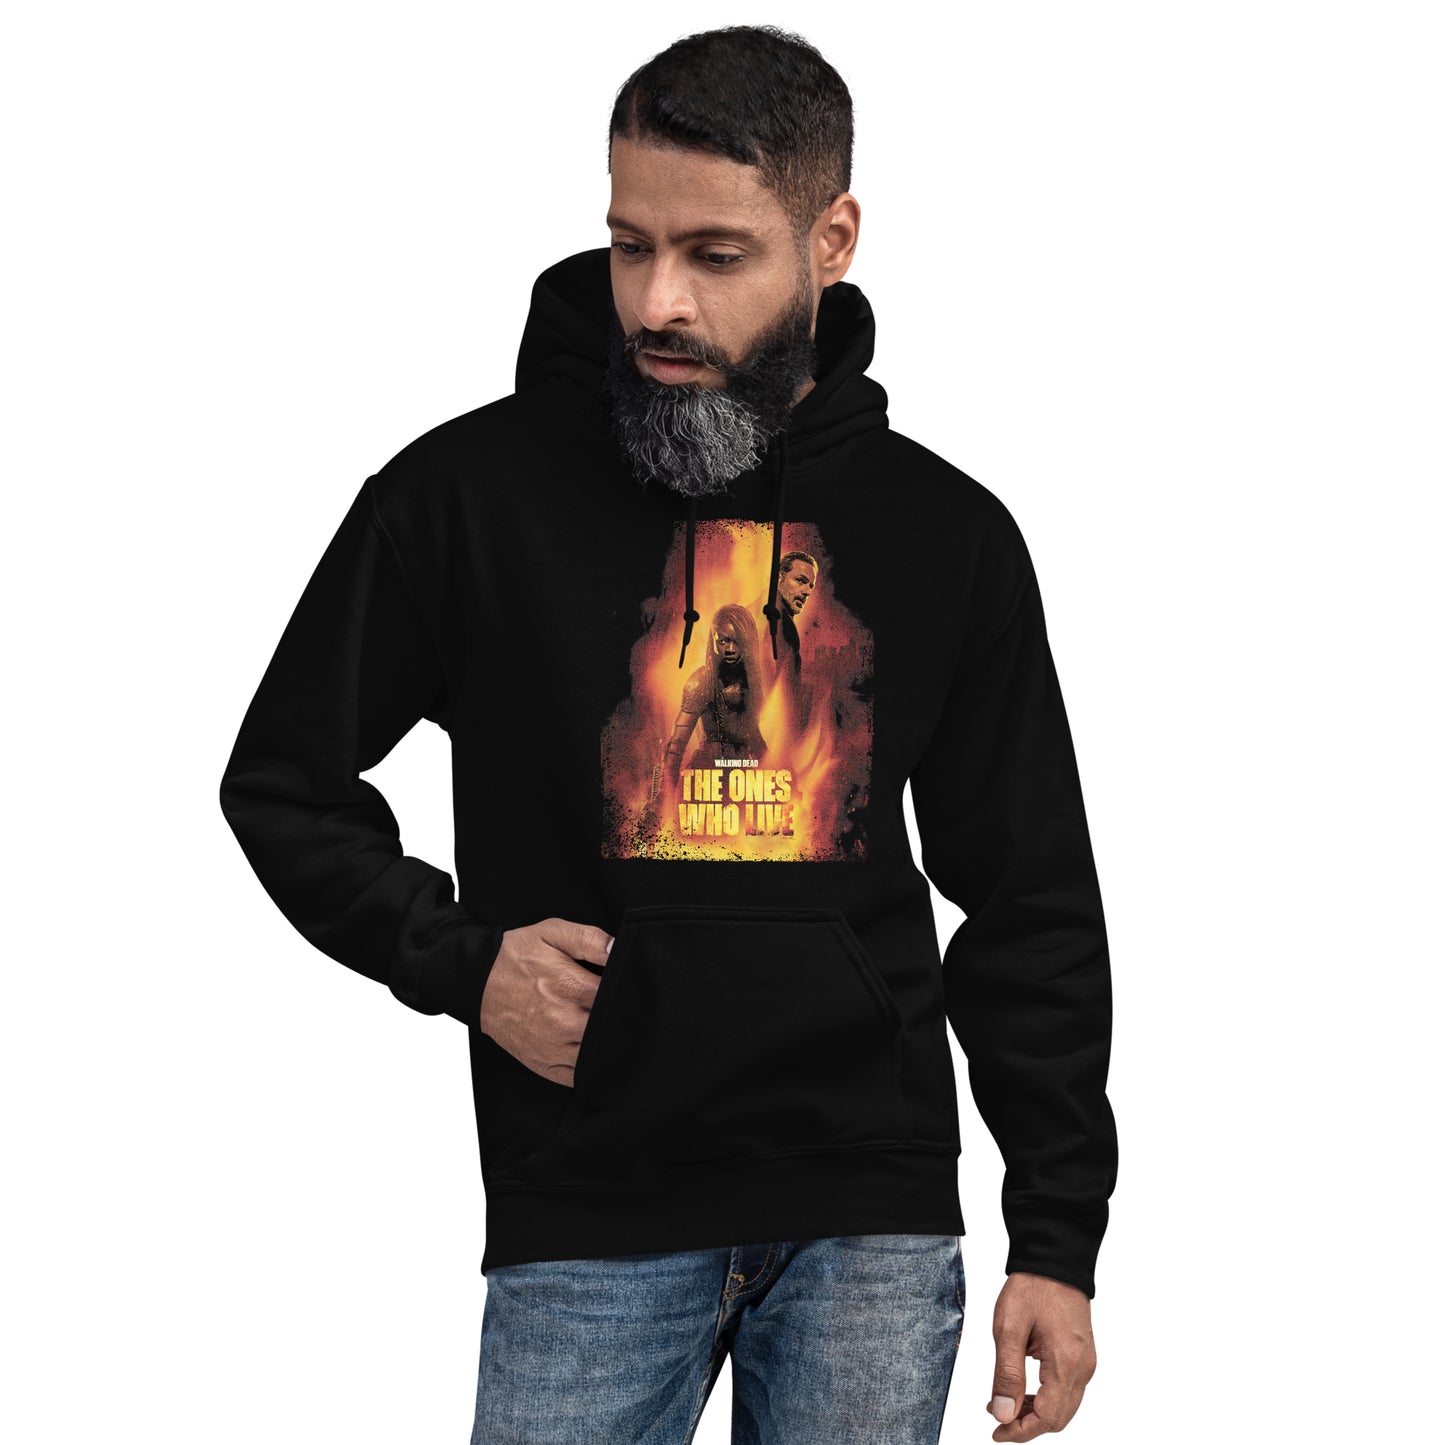 The Walking Dead: The Ones Who Live Adult Hoodie